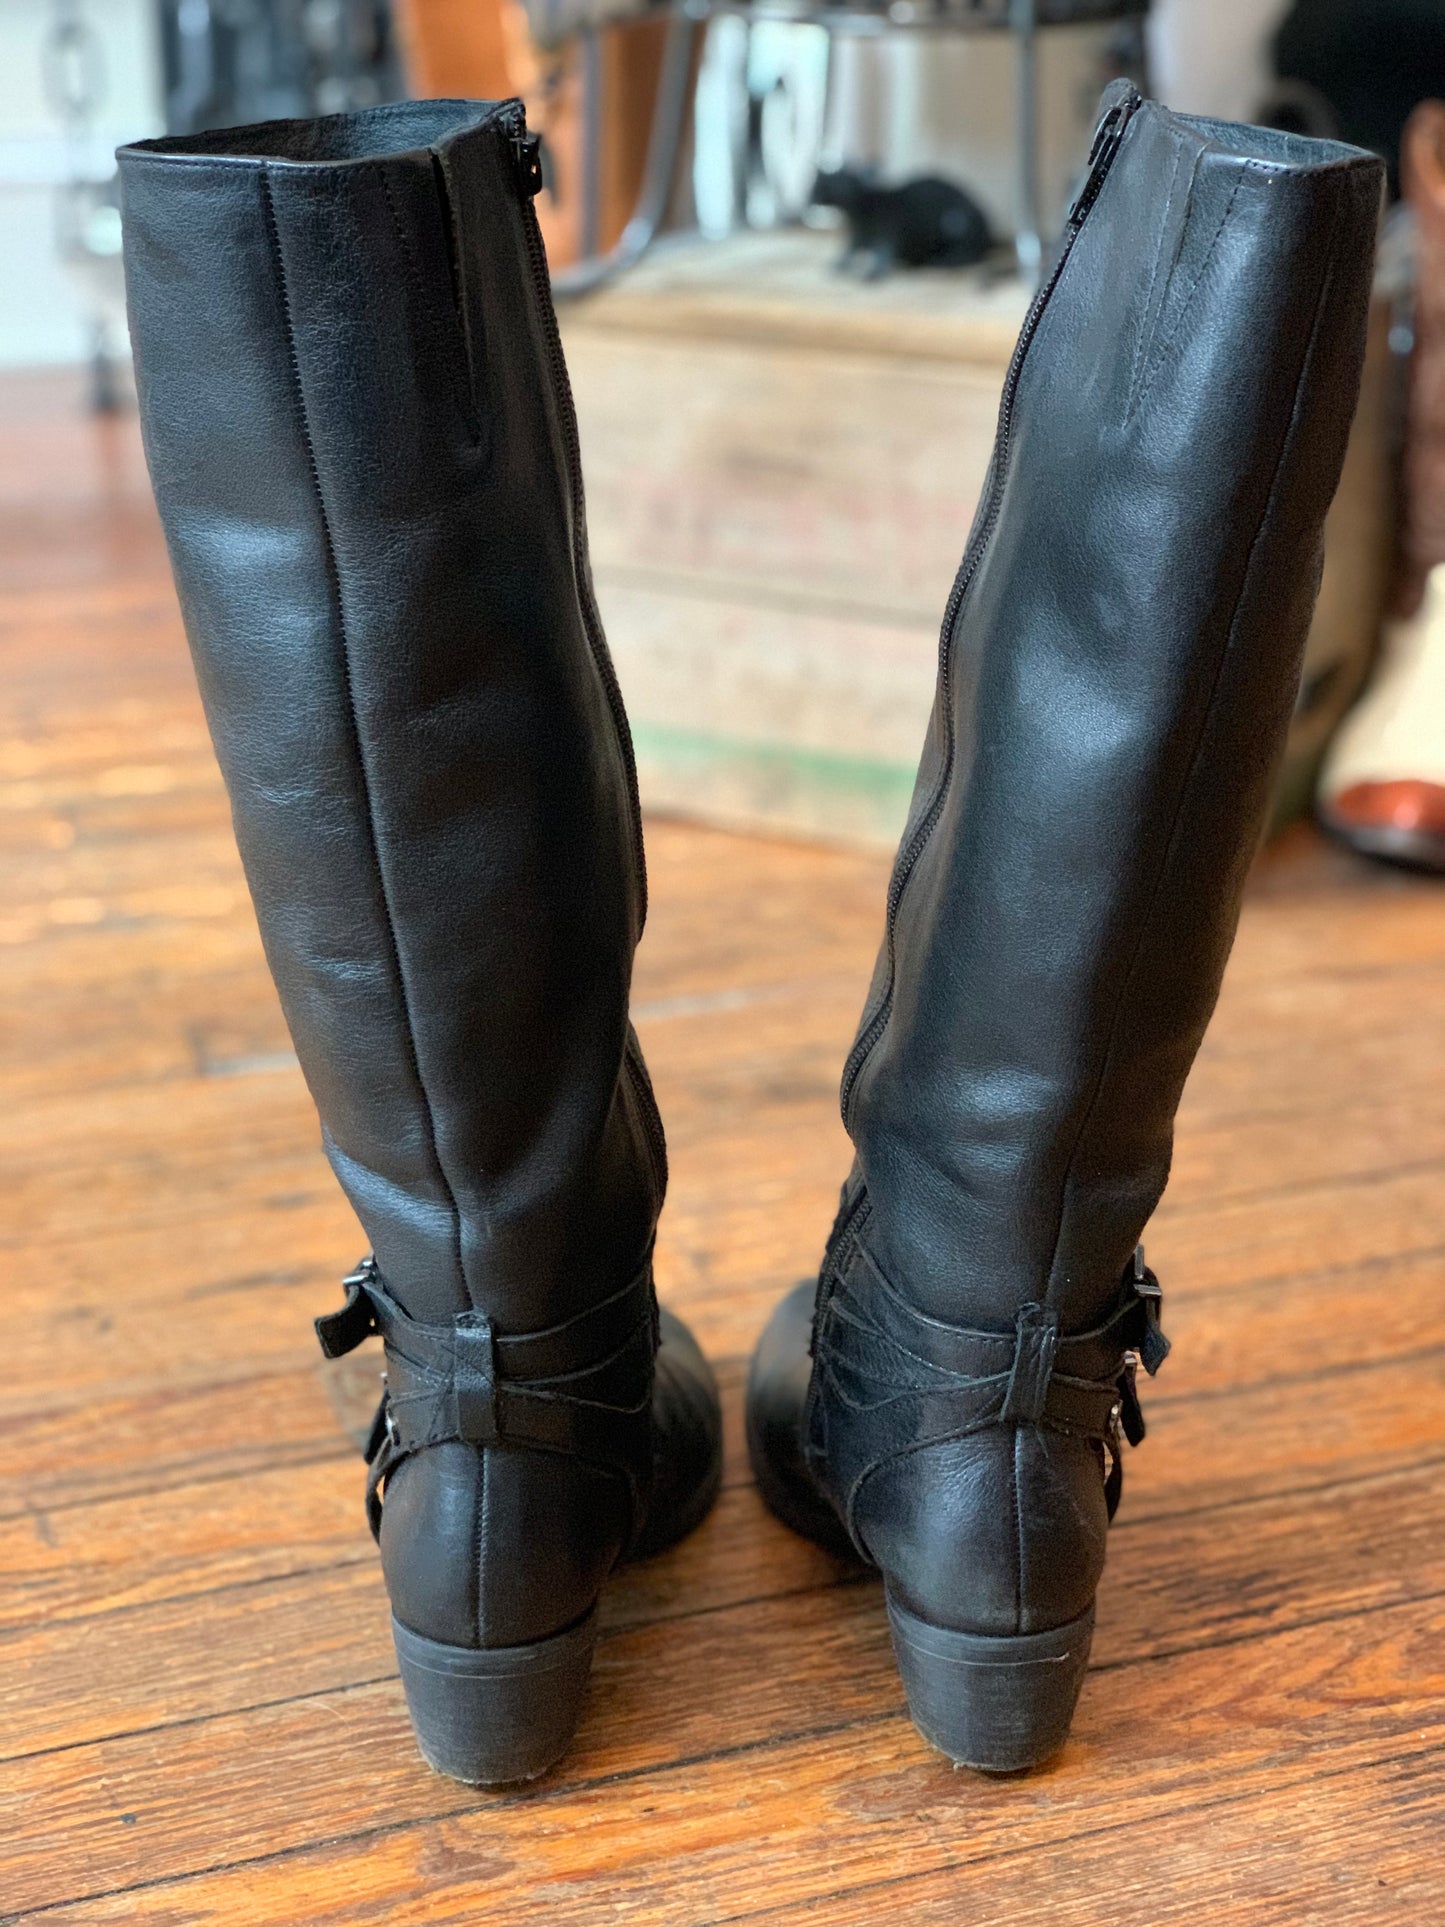 Tall Black Leather Riding Boots